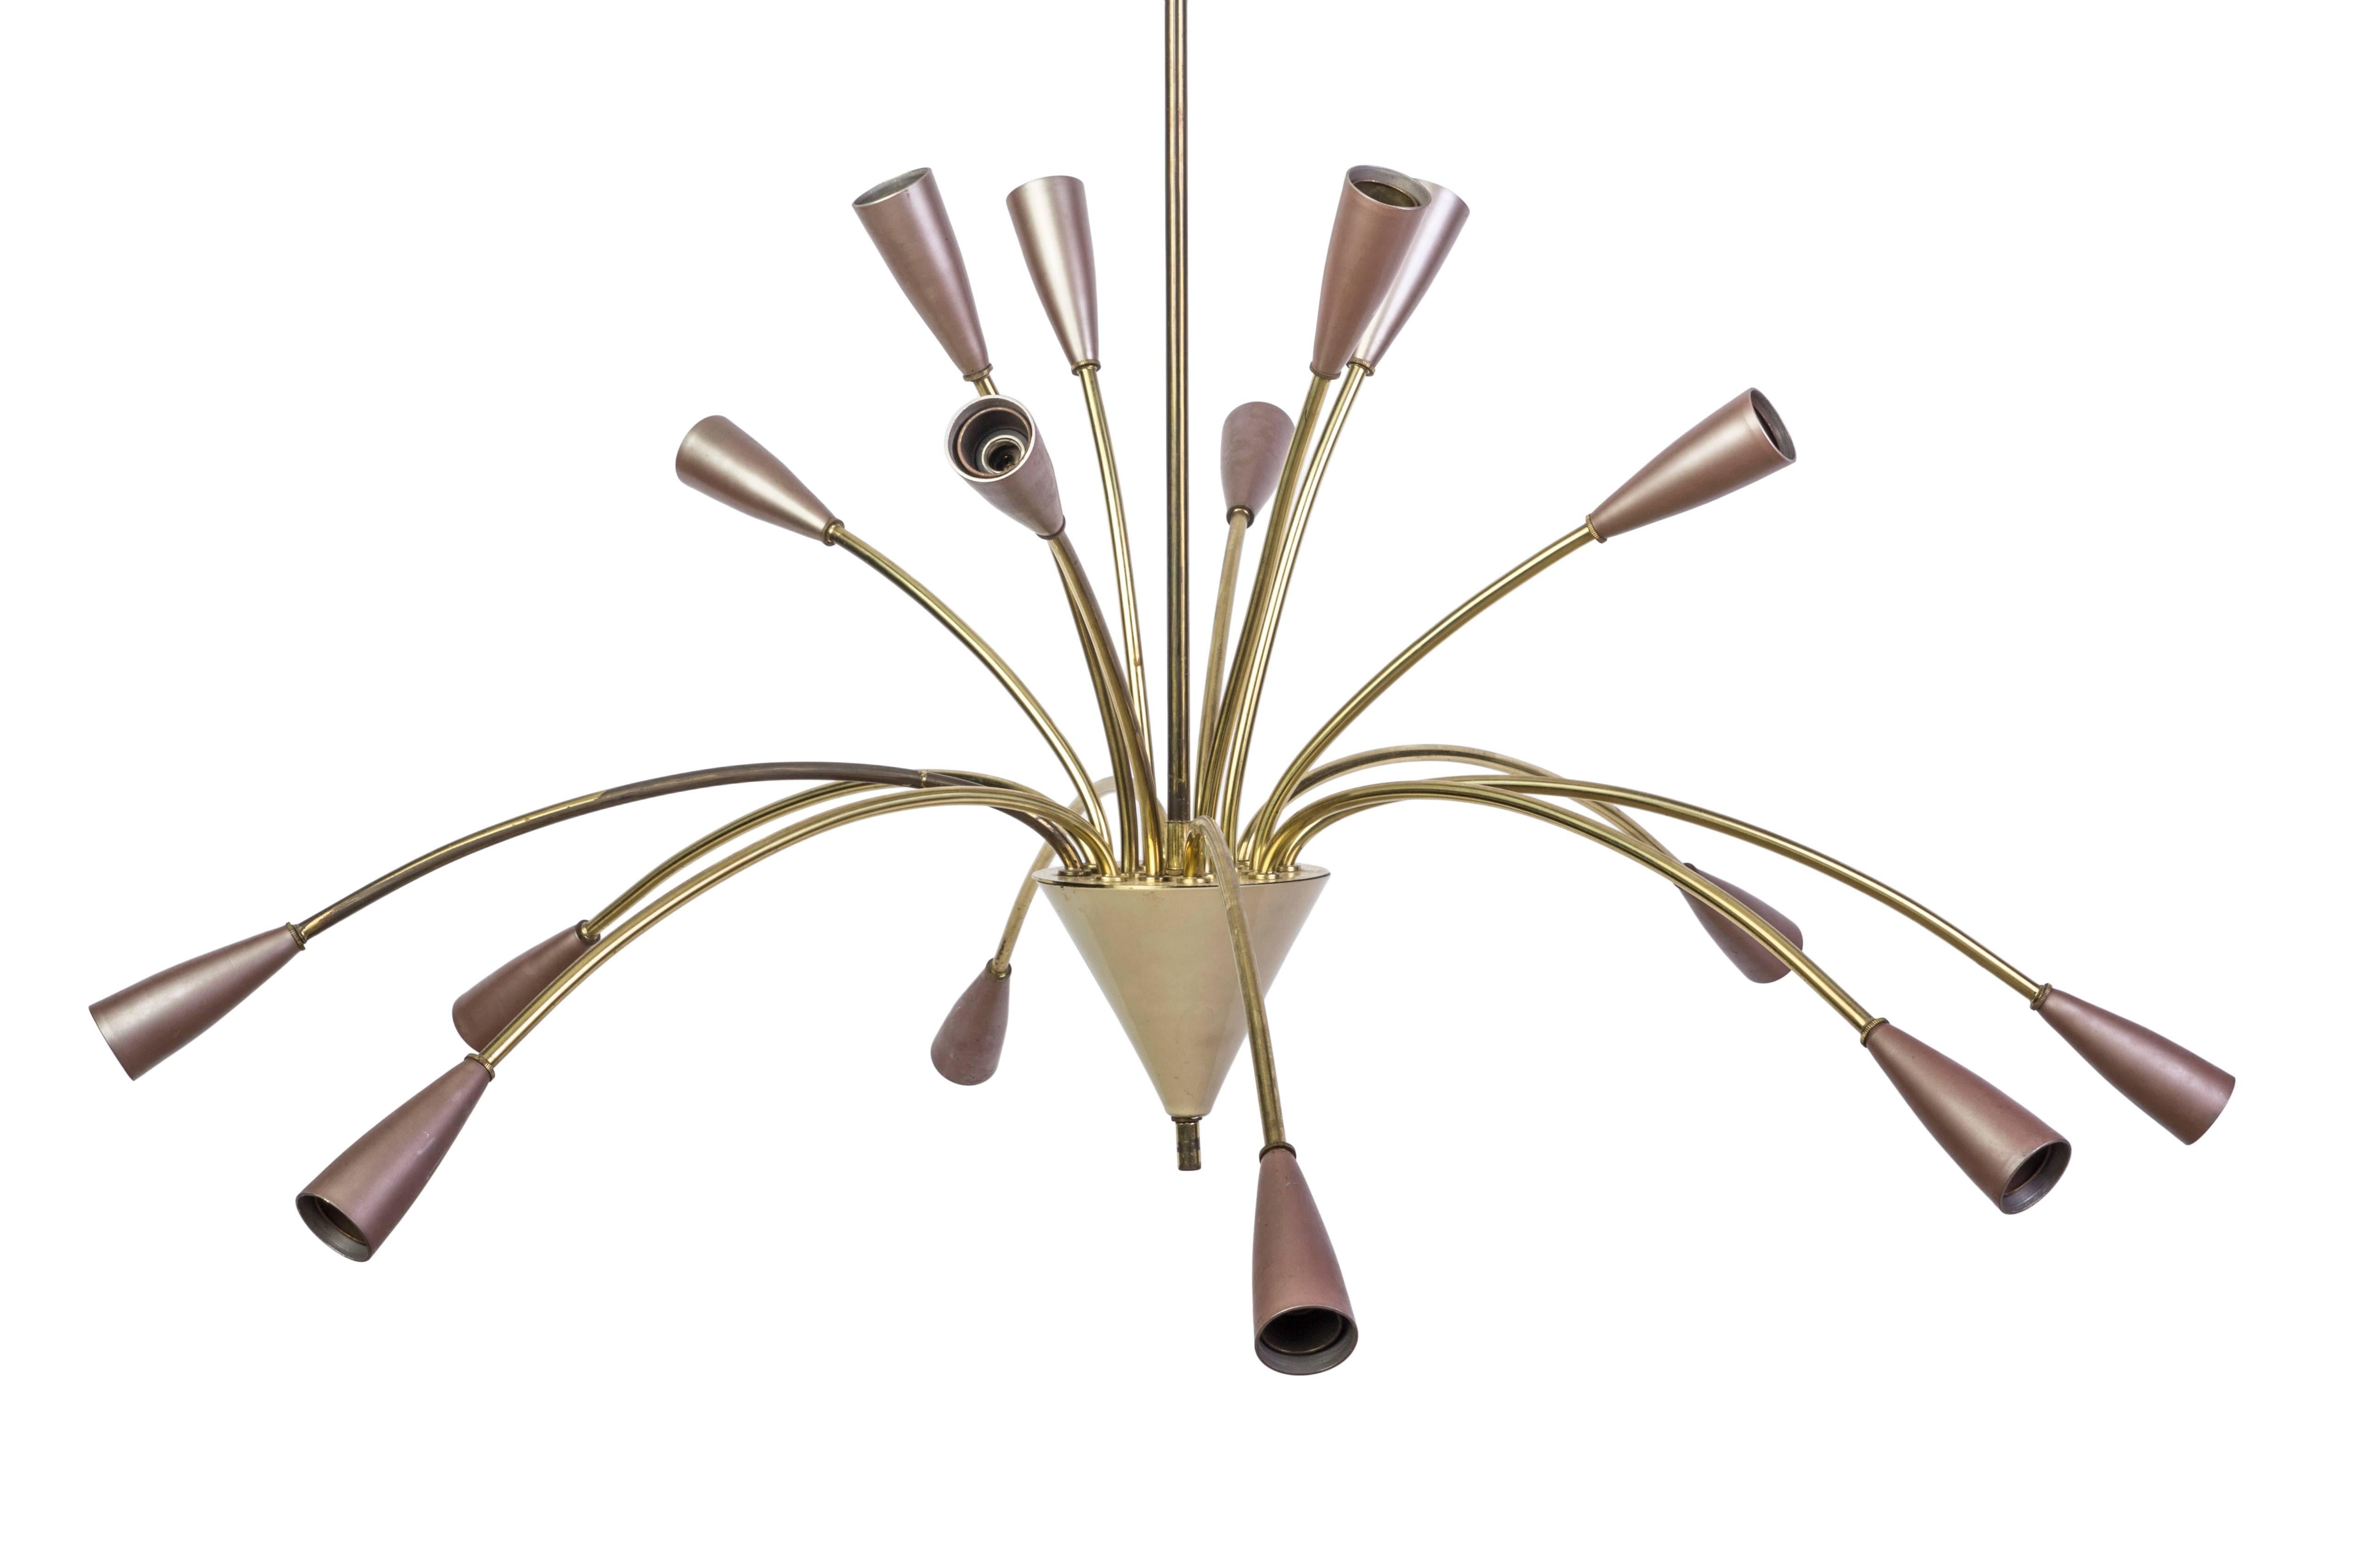 This spectacular 1950's 16-arm Sputnik spider chandelier is reminiscent of an explosive firework with its brass frame and arms extending out to conical form lights with pearlized mauve enameled shades.  The chandelier is in excellent, original